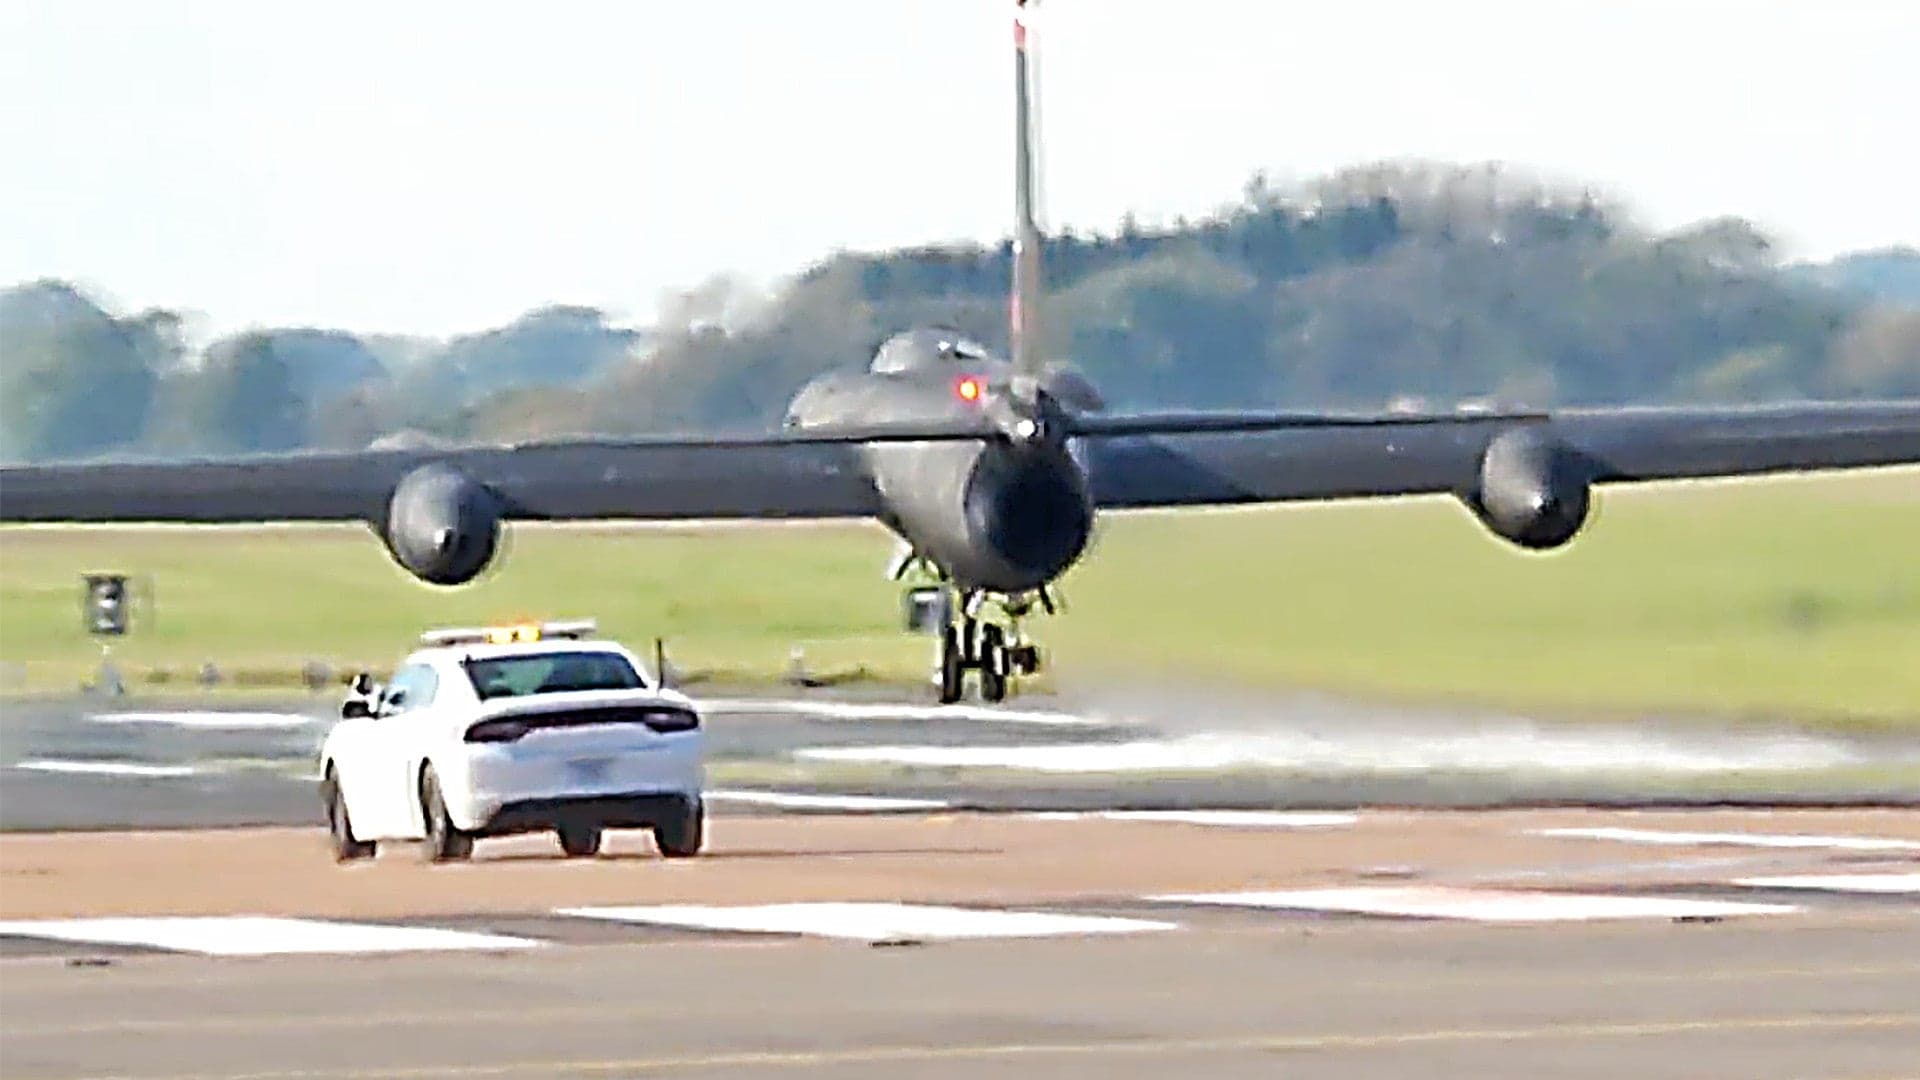 Watch This U-2 Spy Plane Make A Crazy Landing Without Its Flaps Or Speed Brakes